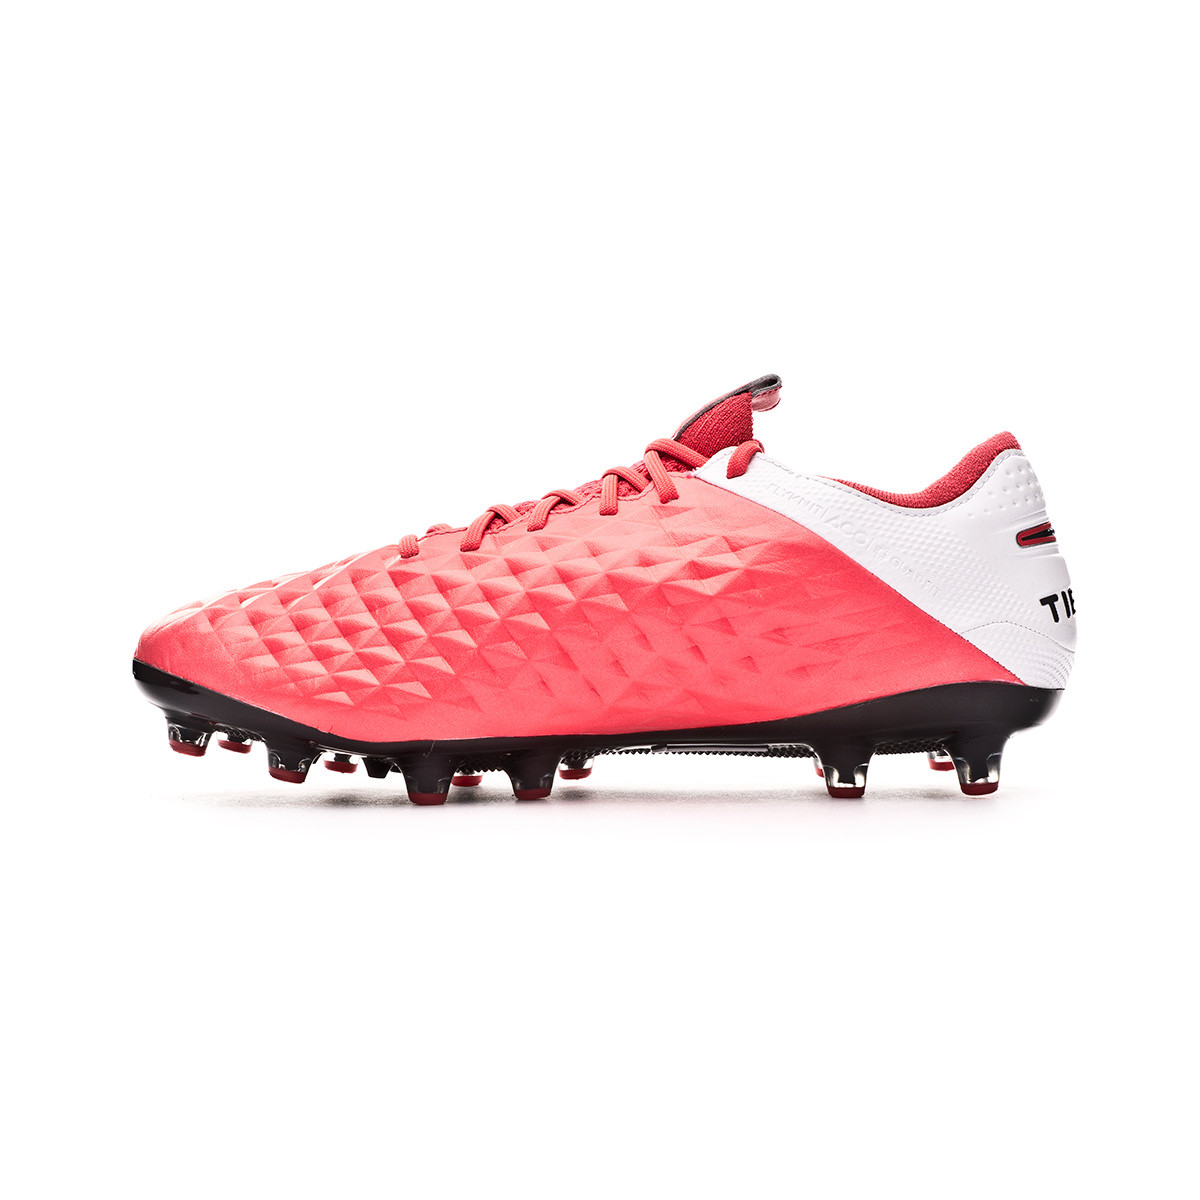 Nike Unisex Adults Time Legend 8 Pro Fg Football Boots.